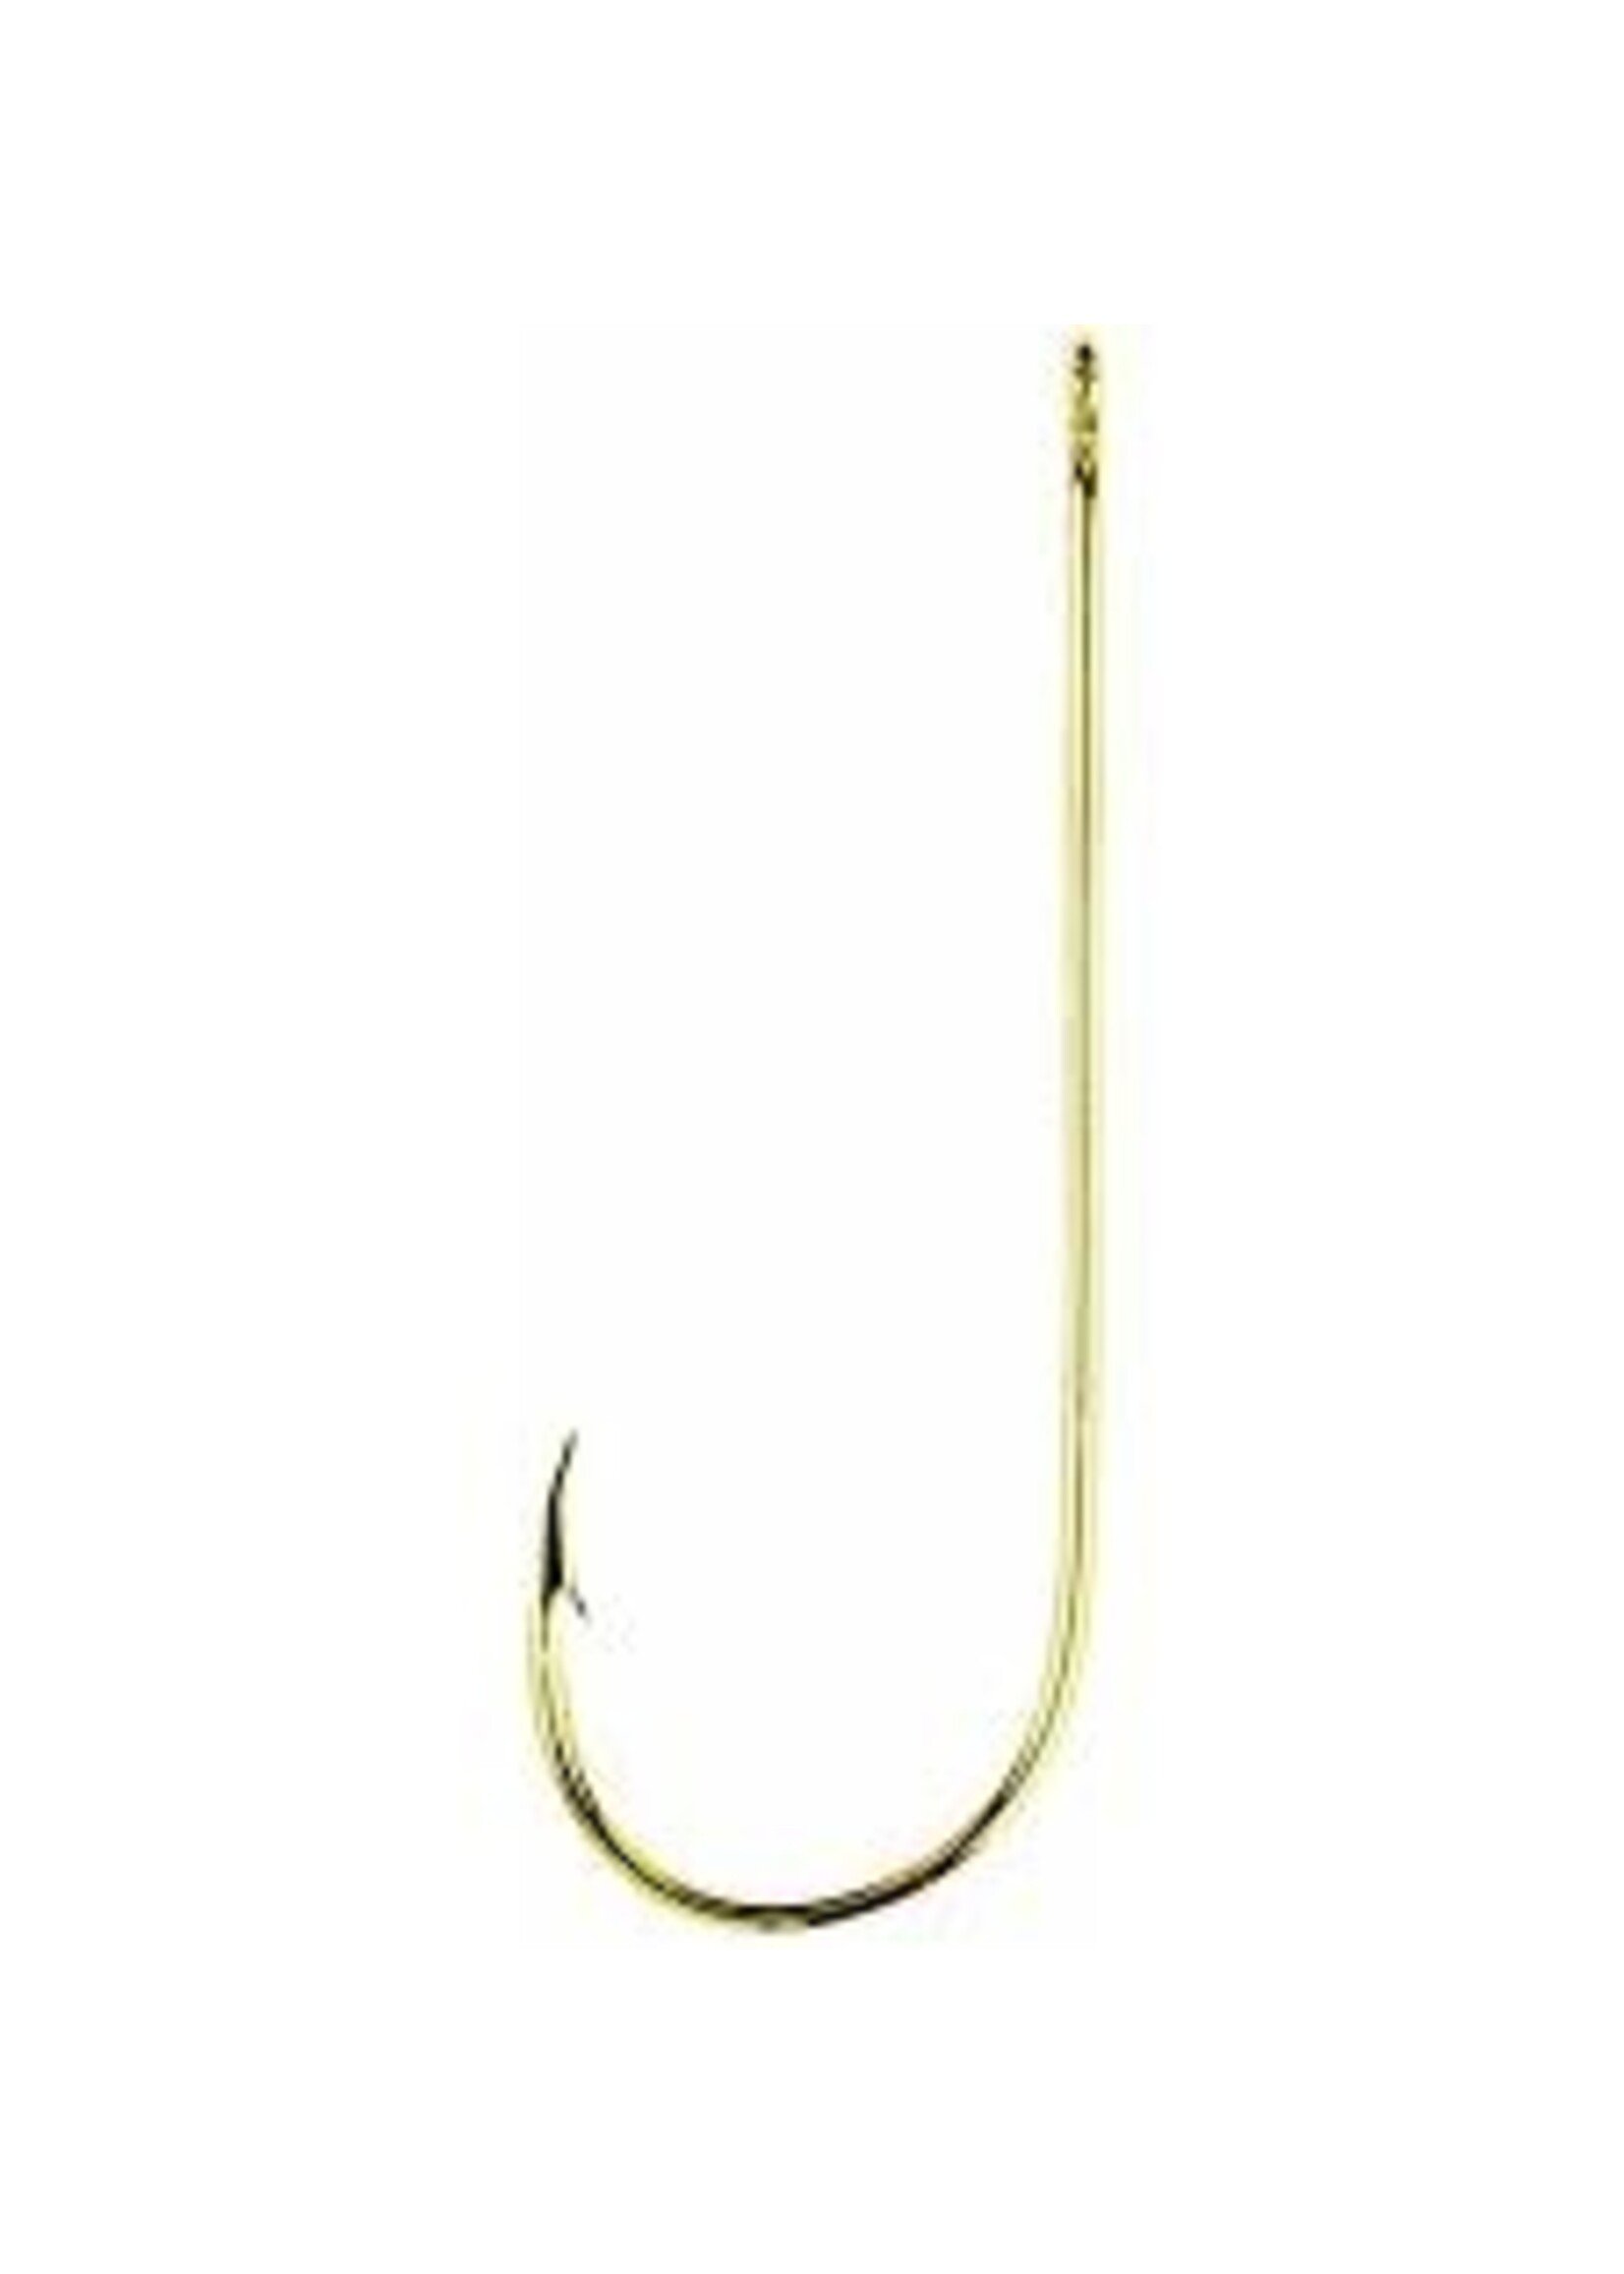 Eagle Claw Eagle Claw Aberdeen 1x Light Wire Non-Offset - 1/0